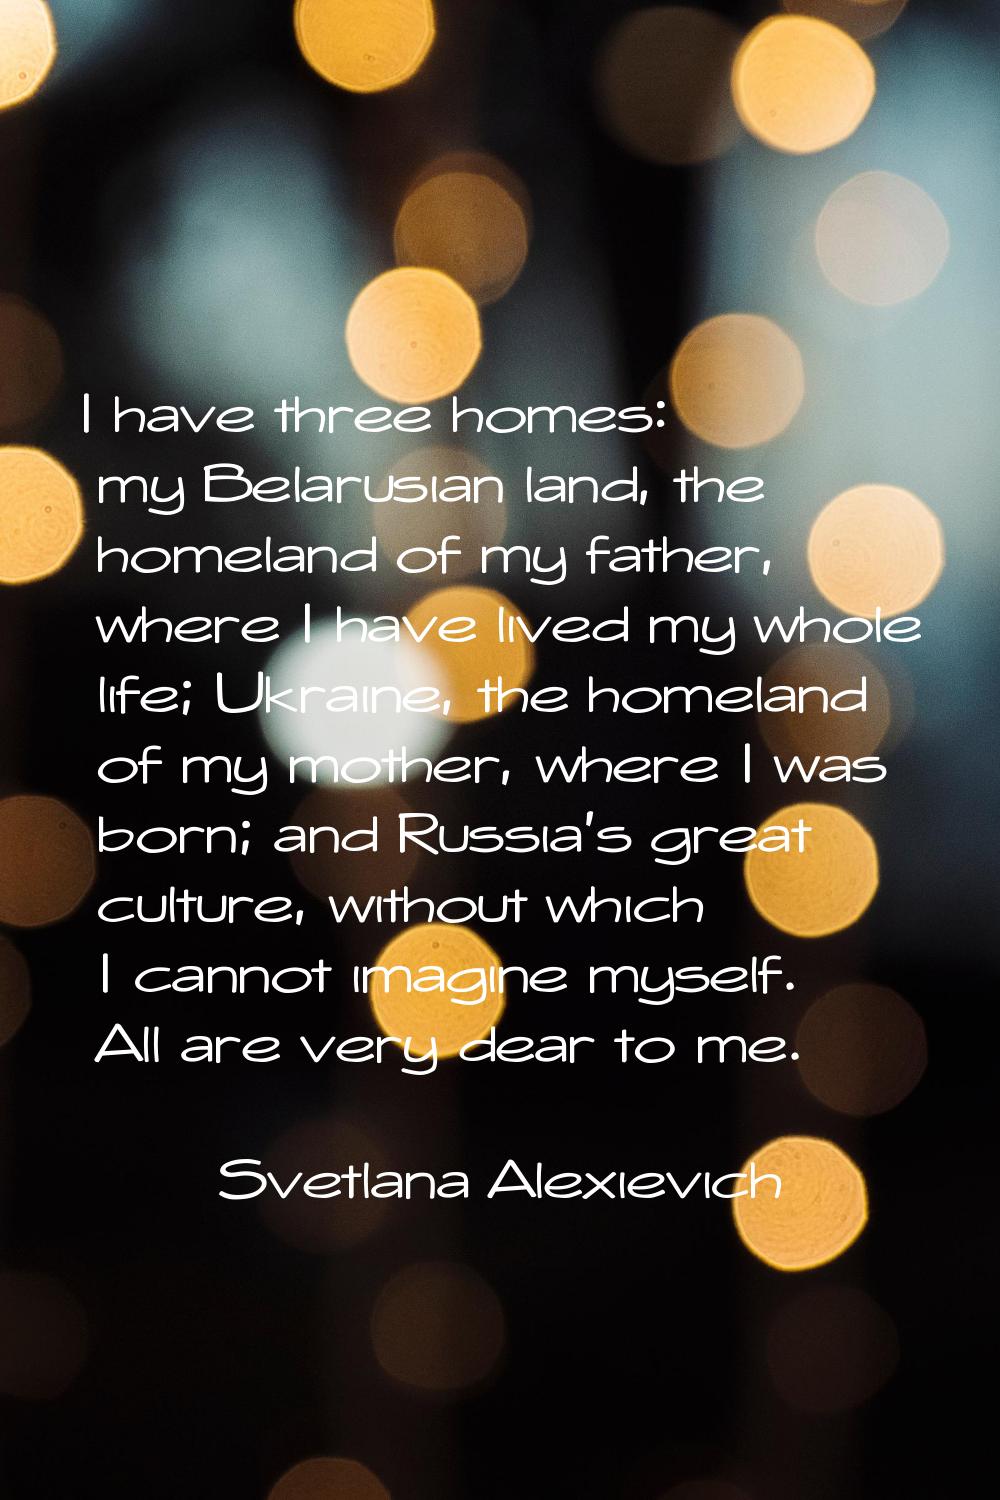 I have three homes: my Belarusian land, the homeland of my father, where I have lived my whole life